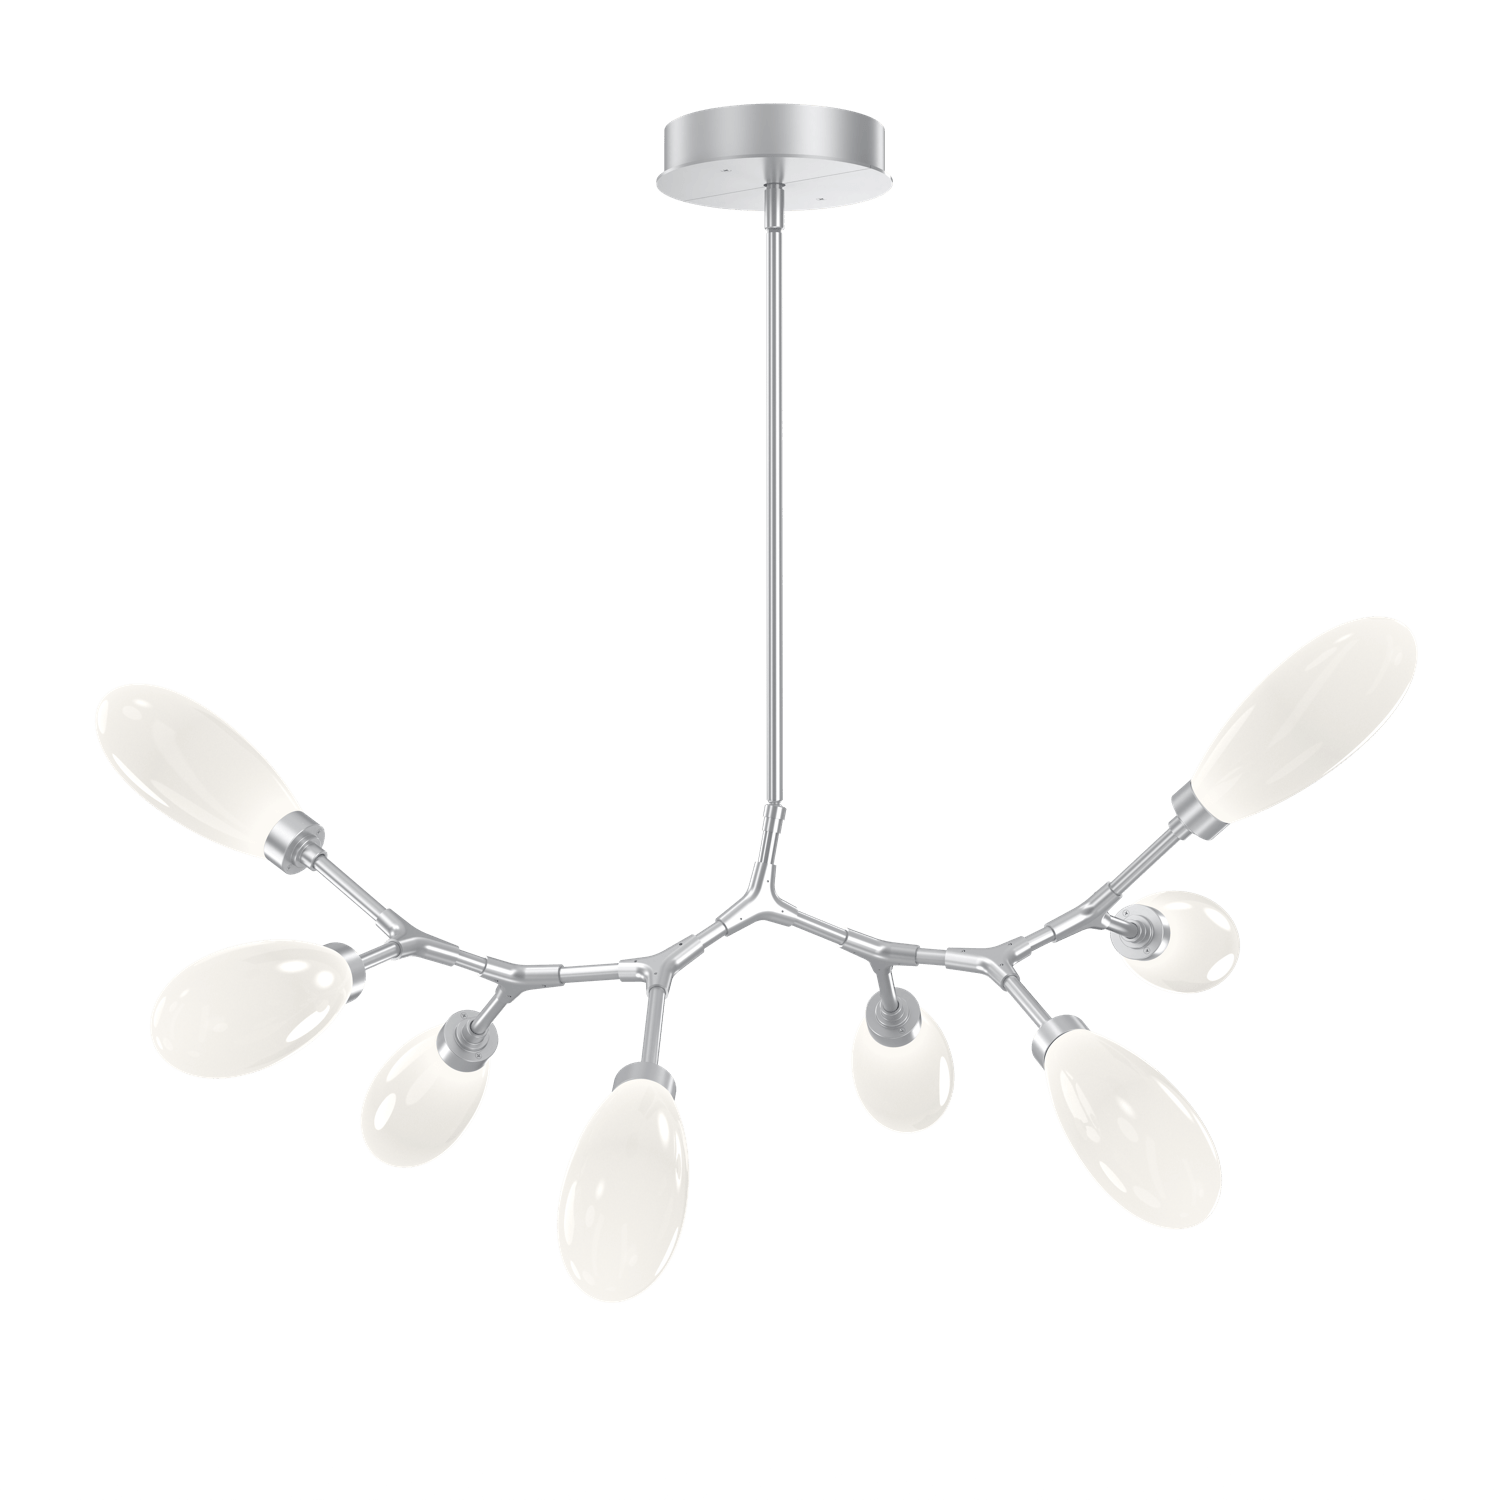 PLB0071-BB-CS-WL-LL-Hammerton-Studio-Fiori-8-light-organic-branch-chandelier-with-classic-silver-finish-and-opal-white-glass-shades-and-LED-lamping